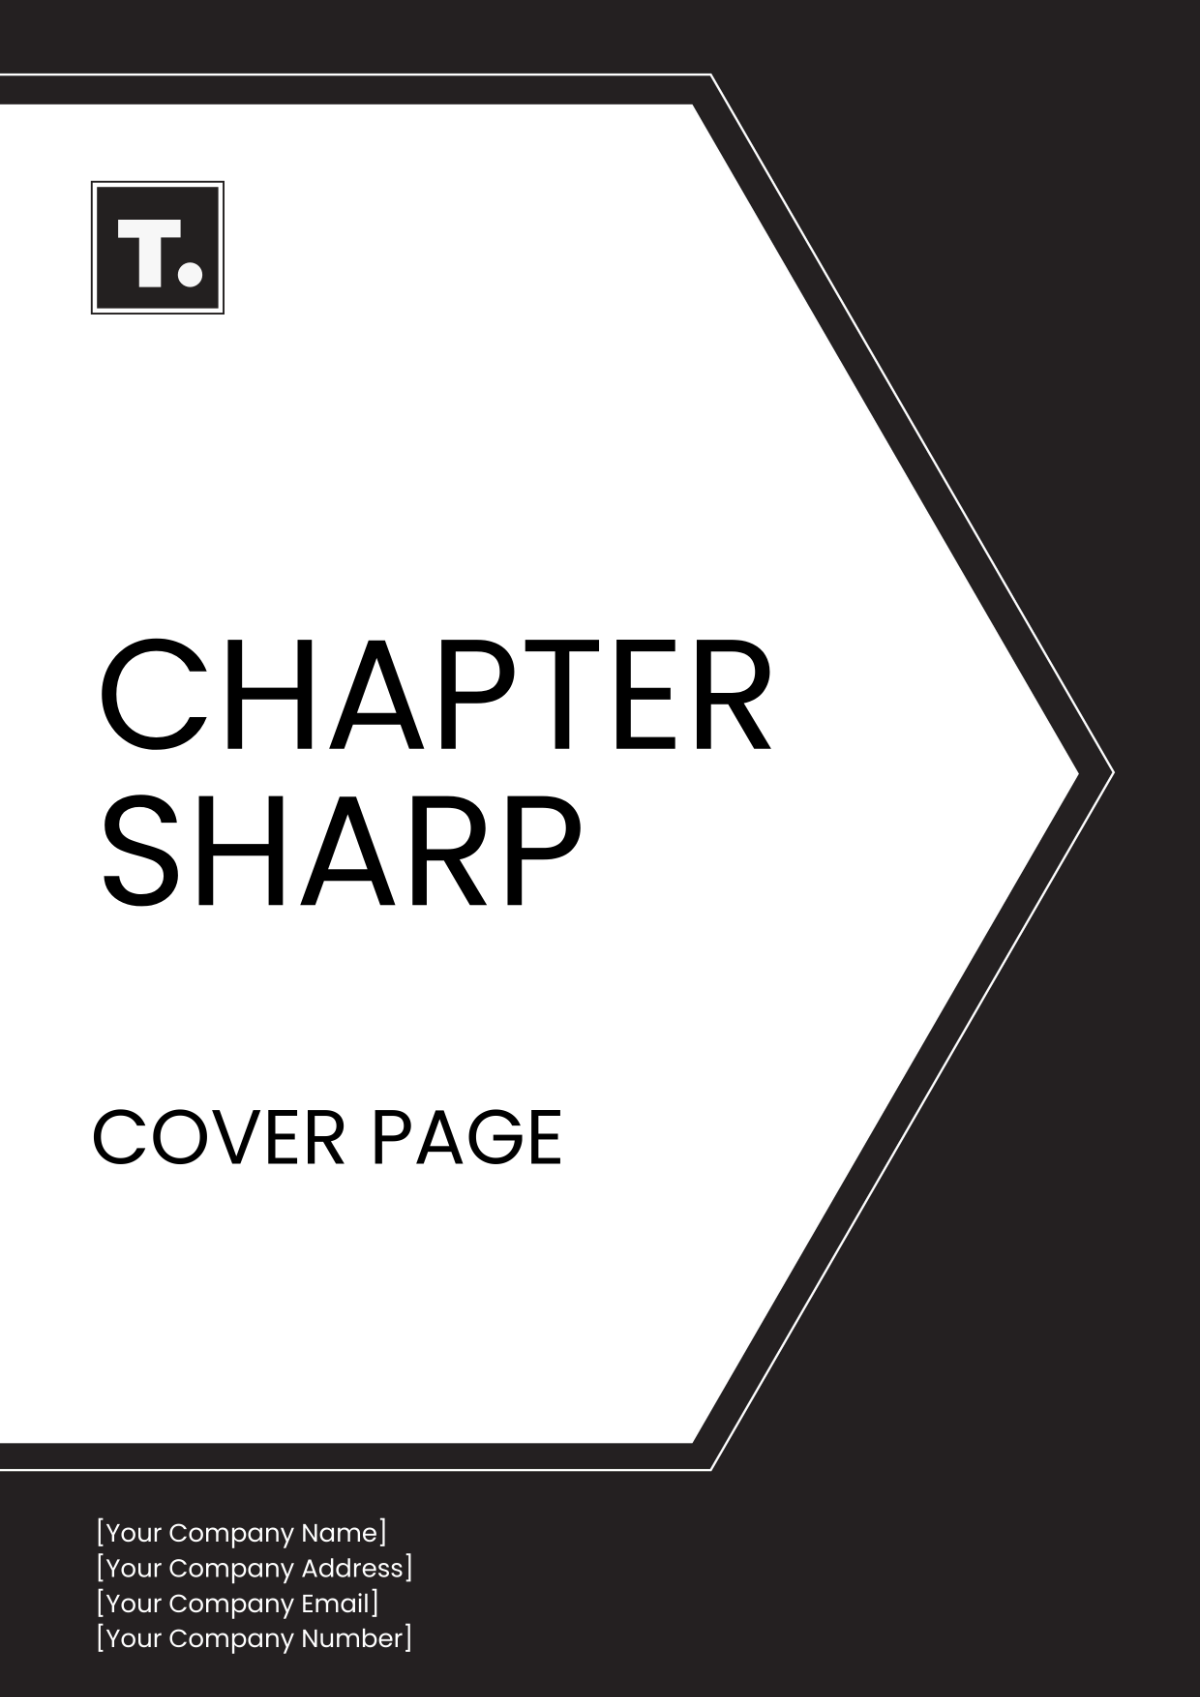 Chapter Sharp Cover Page